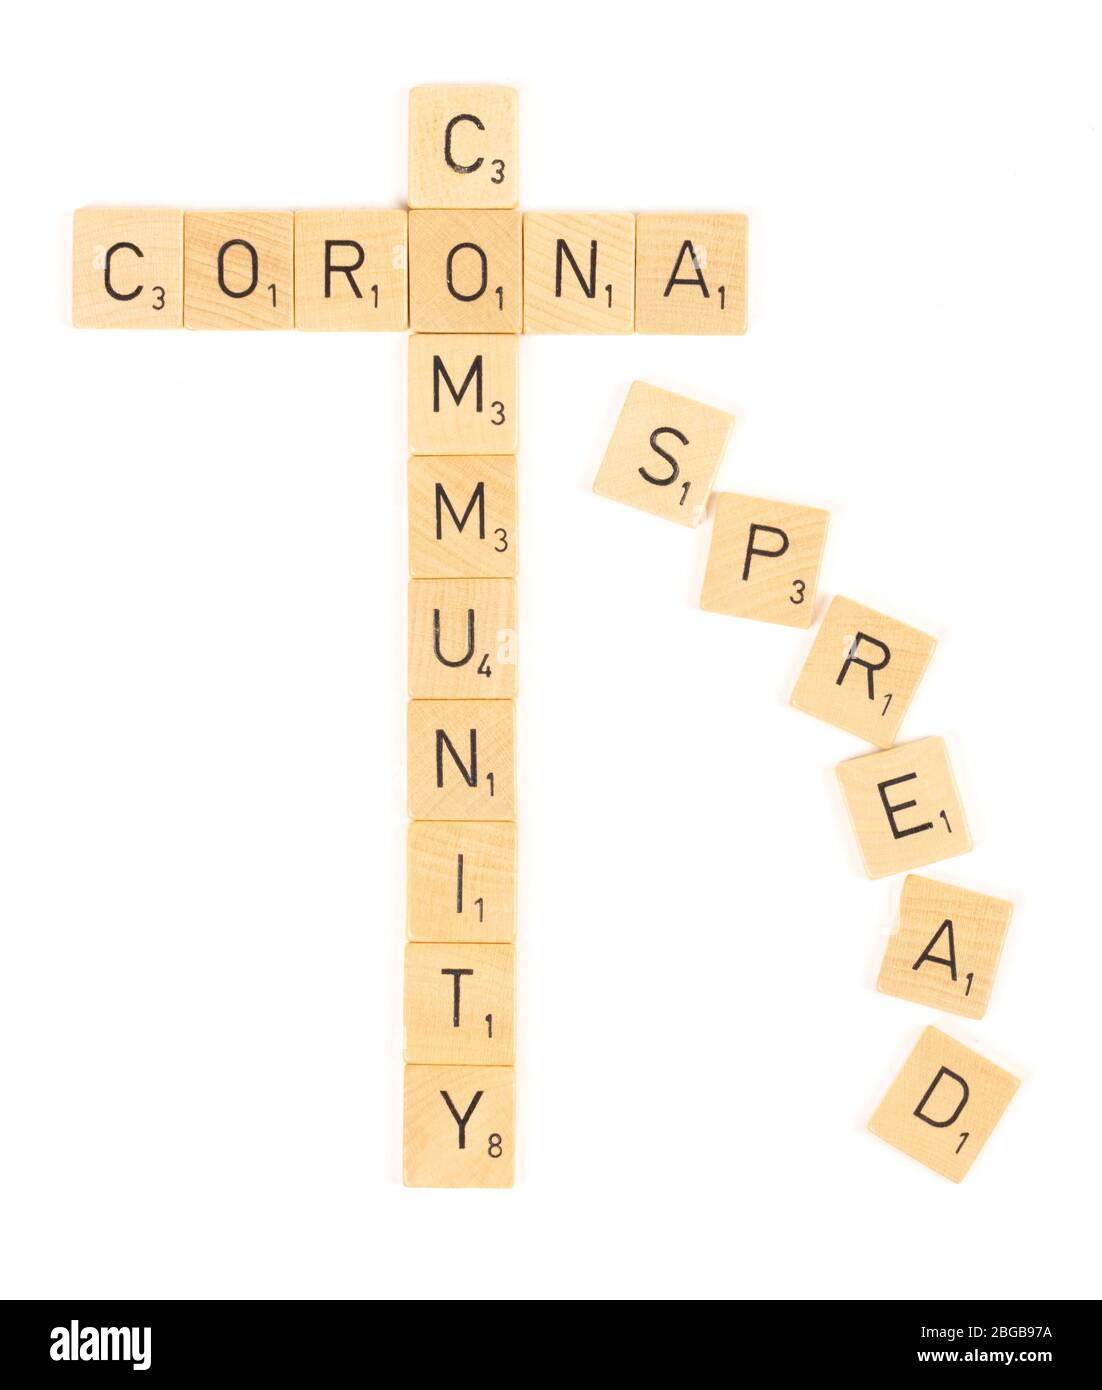 Corona community spread scrable letters, isolated on a white background Stock Photo